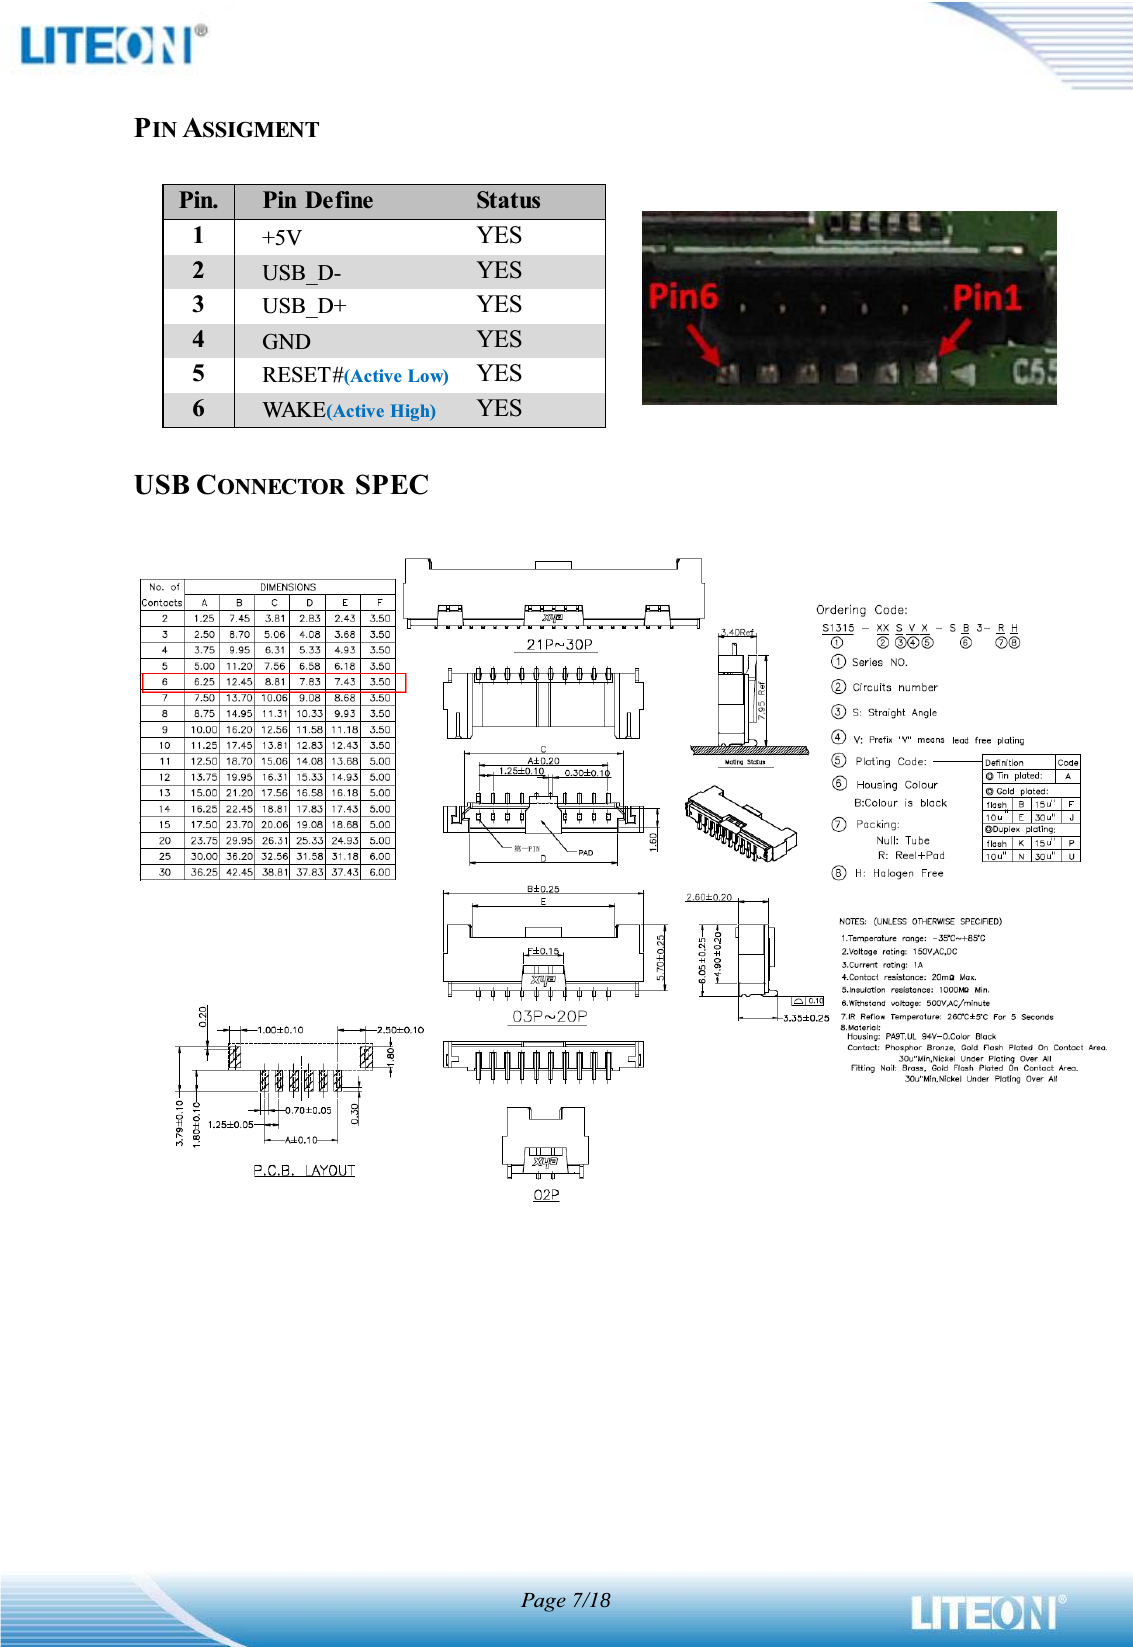 Page 7/1PIN ASSIGMENTPin.Pin DefineStatus1+5VYES2USB_D-YES3USB_D+YES4GNDYES5RESET#(Active Low)YES6WAK E (Active High)YESUSB CONNECTOR  SPEC